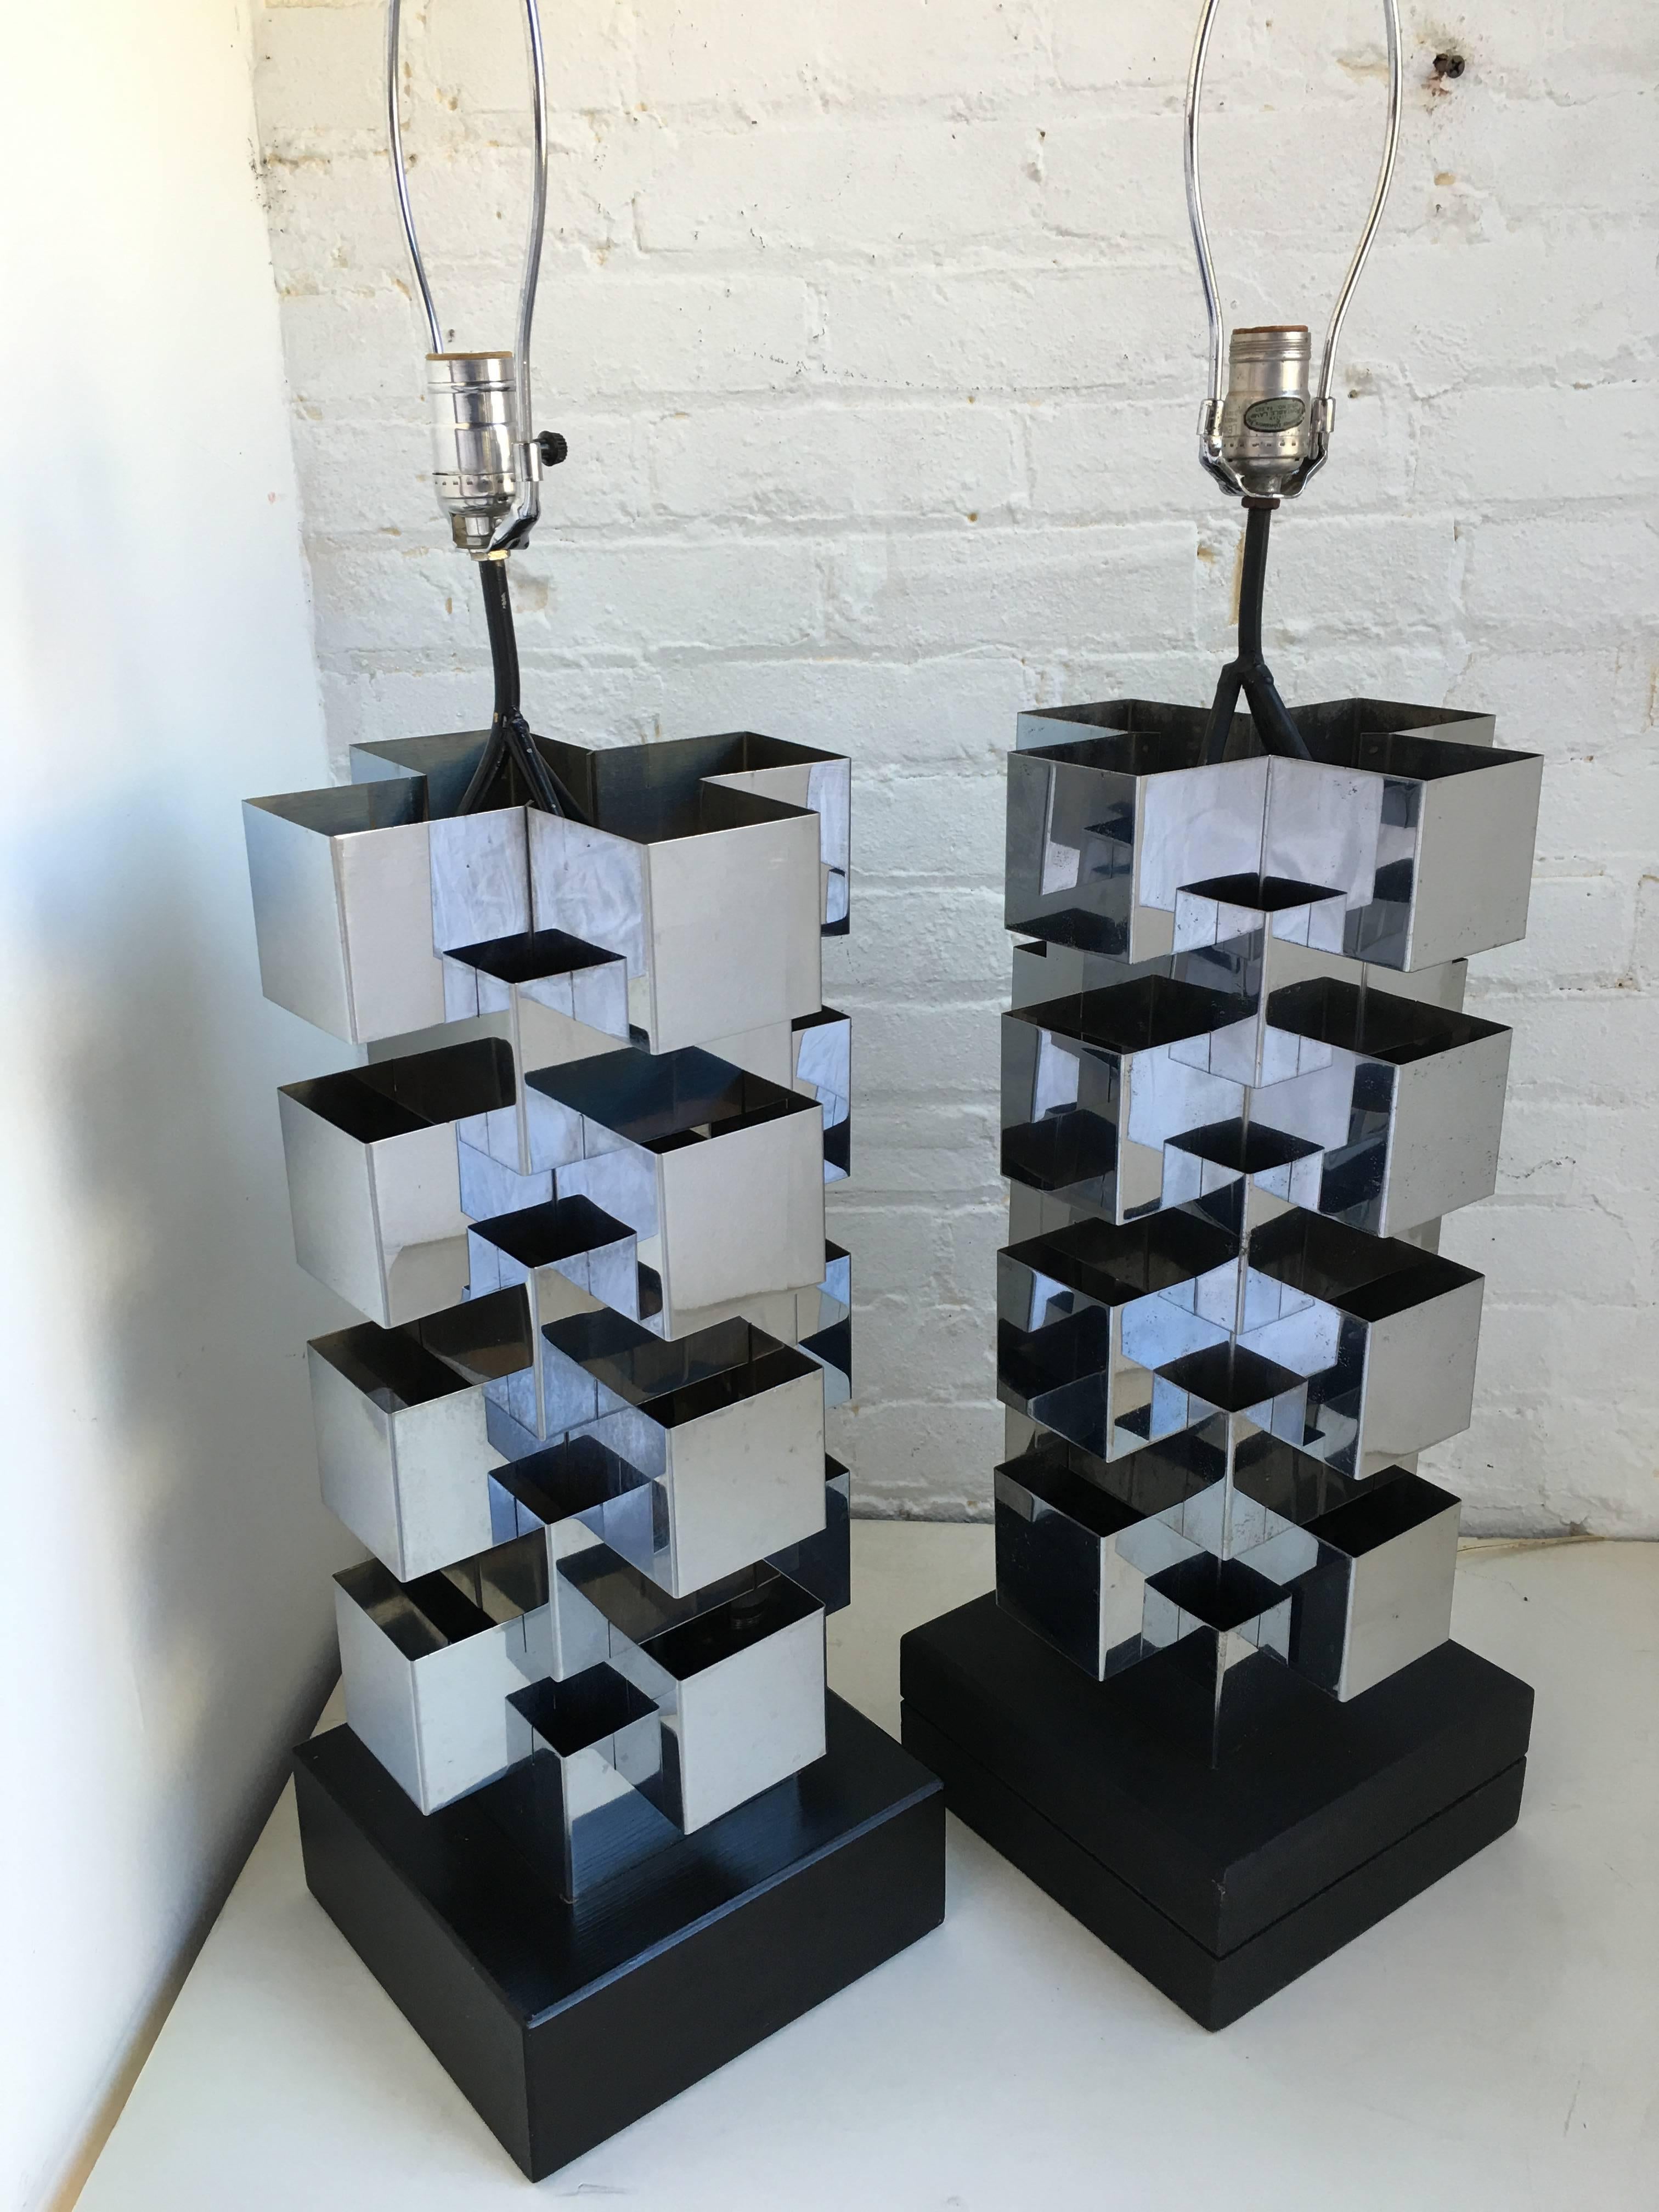 Monumental Mid-Century Modern pair of sculptural cubist table lamps by C. Jere. Each Brutalist style lamp is composed of a series of stacked chrome steel cubes. A switch on the cord illuminates a bulb within the base and top socket. Both wood lamp